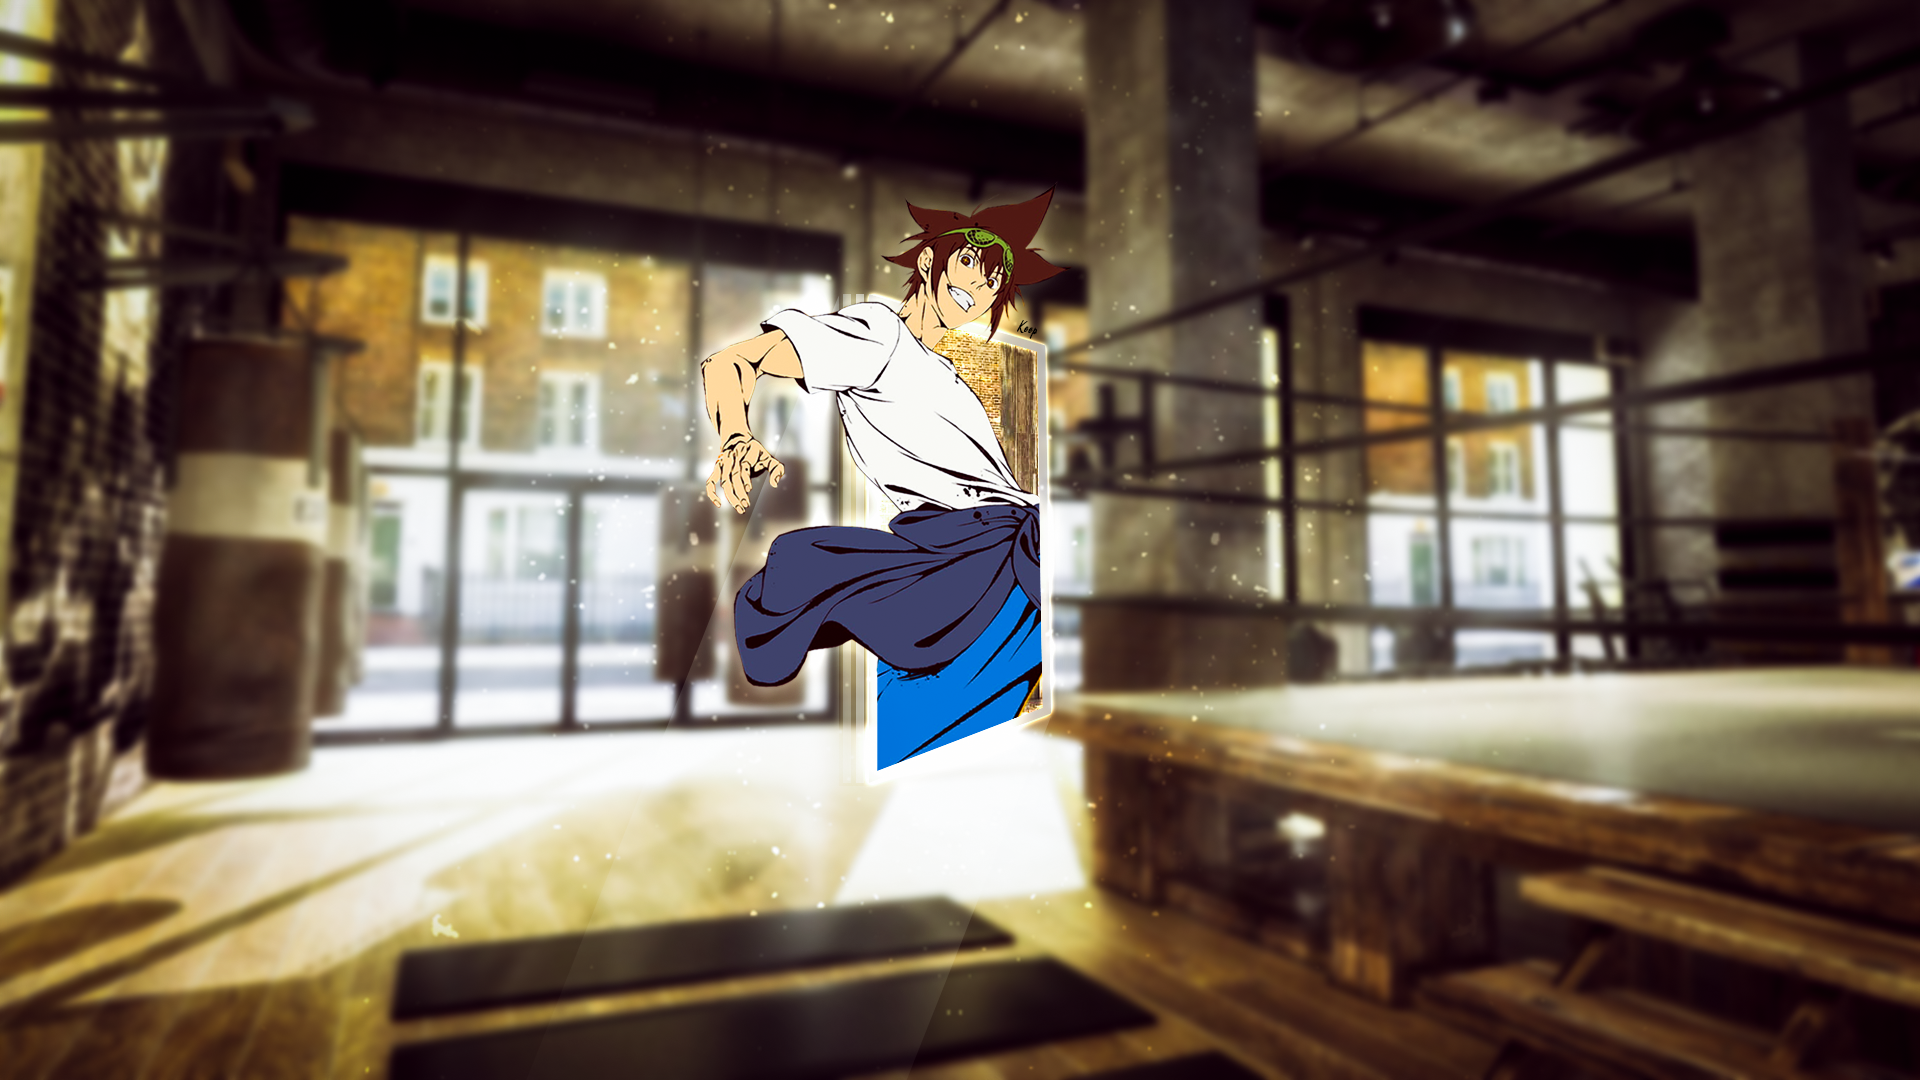 Anime 1920x1080 The God of High School Jin Mori picture-in-picture anime DeviantArt anime men